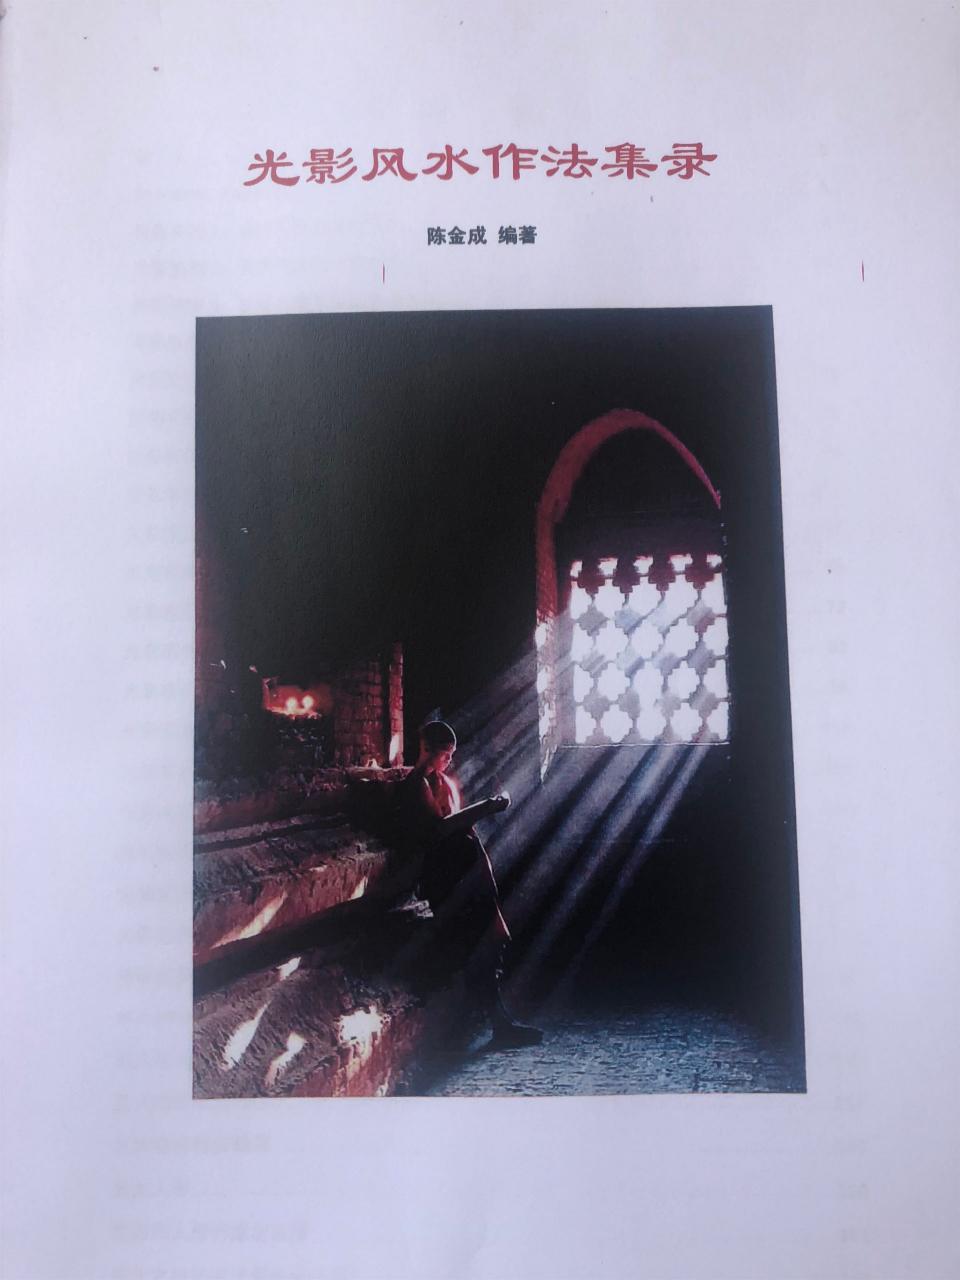 Two books of the secret application of the twenty-four mountain qi method light and shadow feng shui practice